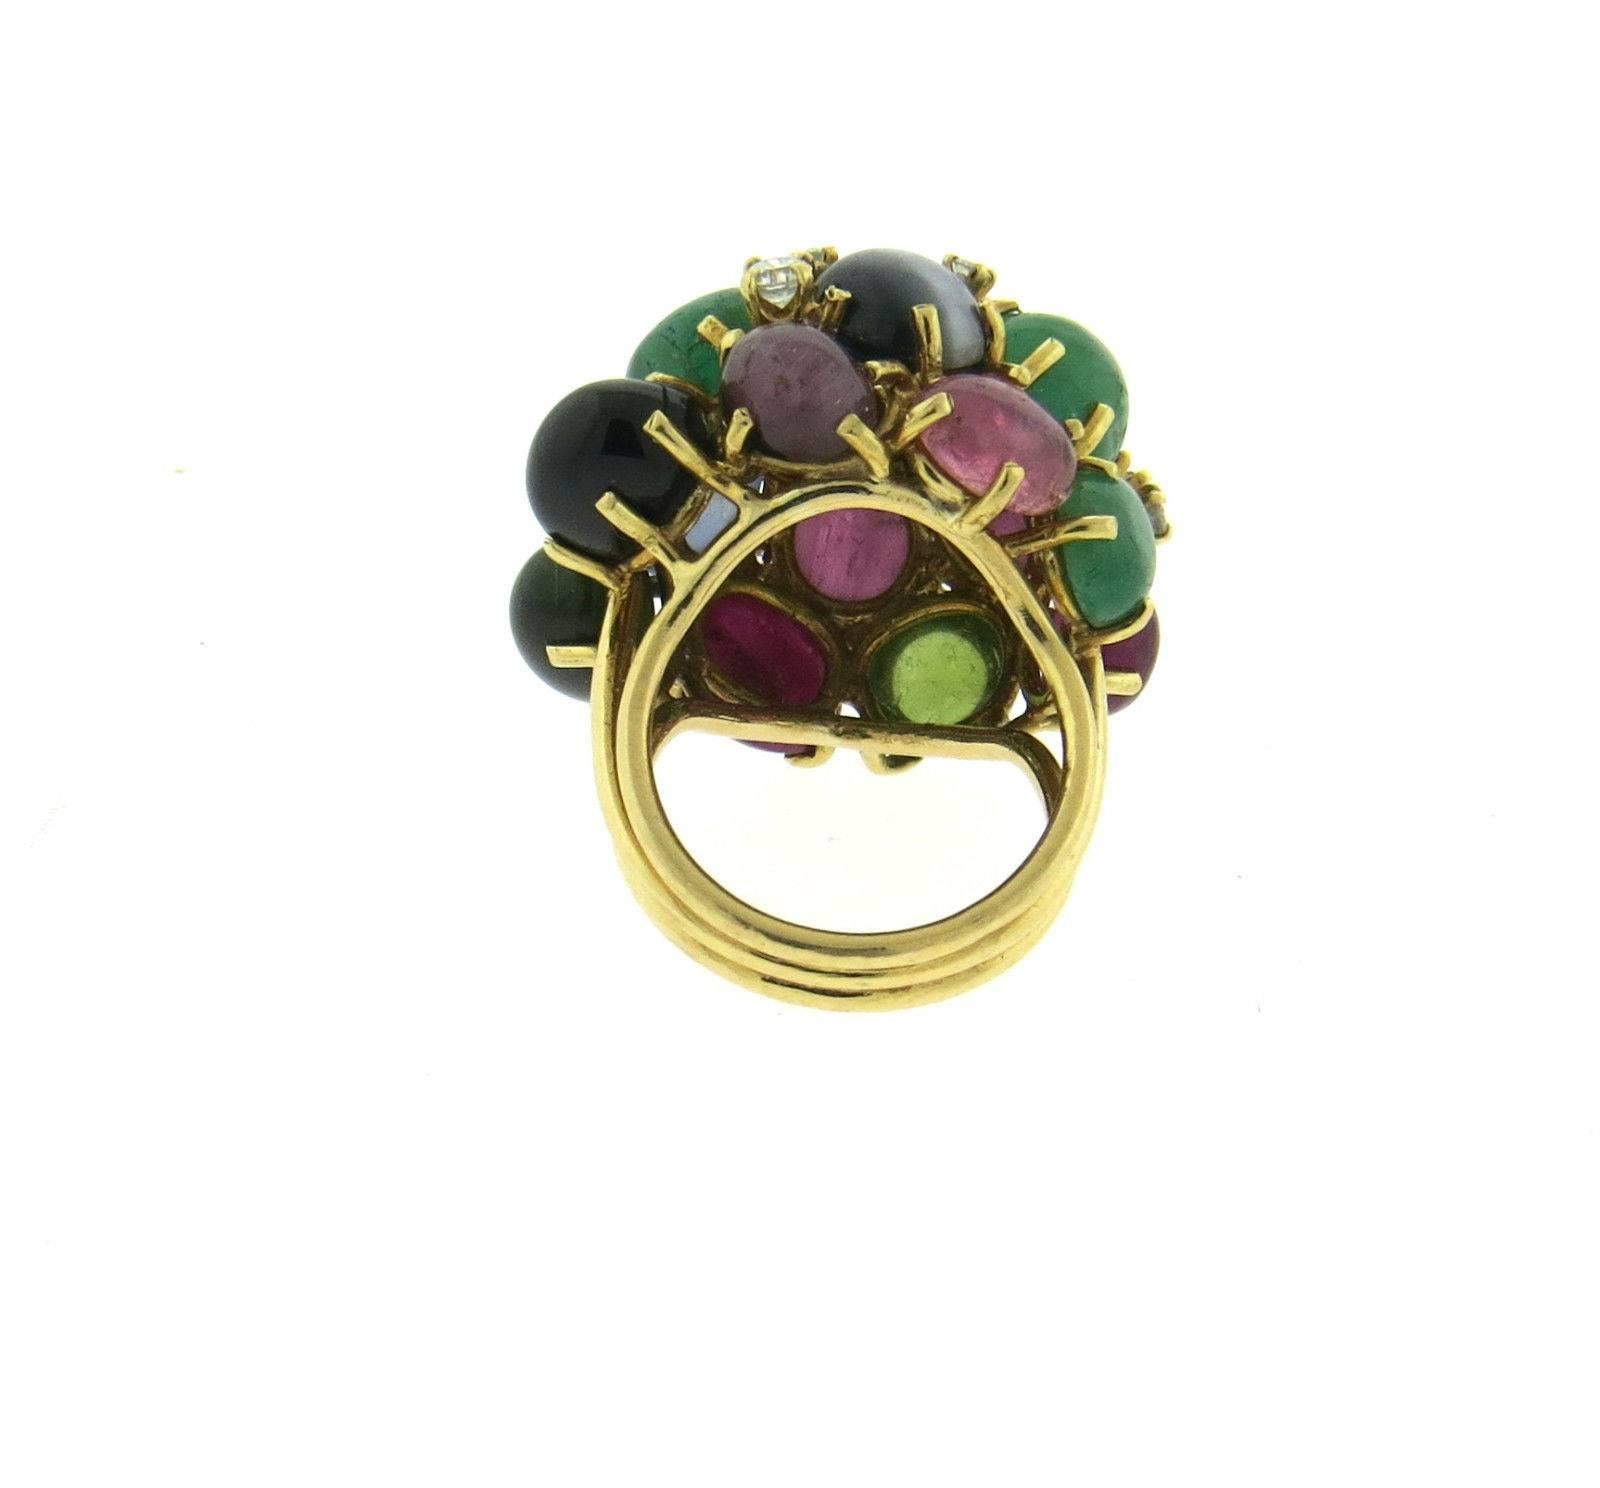 An 18k yellow gold ring set with sapphire, emerald, peridot and tourmaline cabochons along with 0.36ctw of H/VS diamonds.  The ring is a size 6, ring top is 24mm x 28mm, sits approx. 20mm from the finger.  Marked: K. Lambert.  The weight of the ring